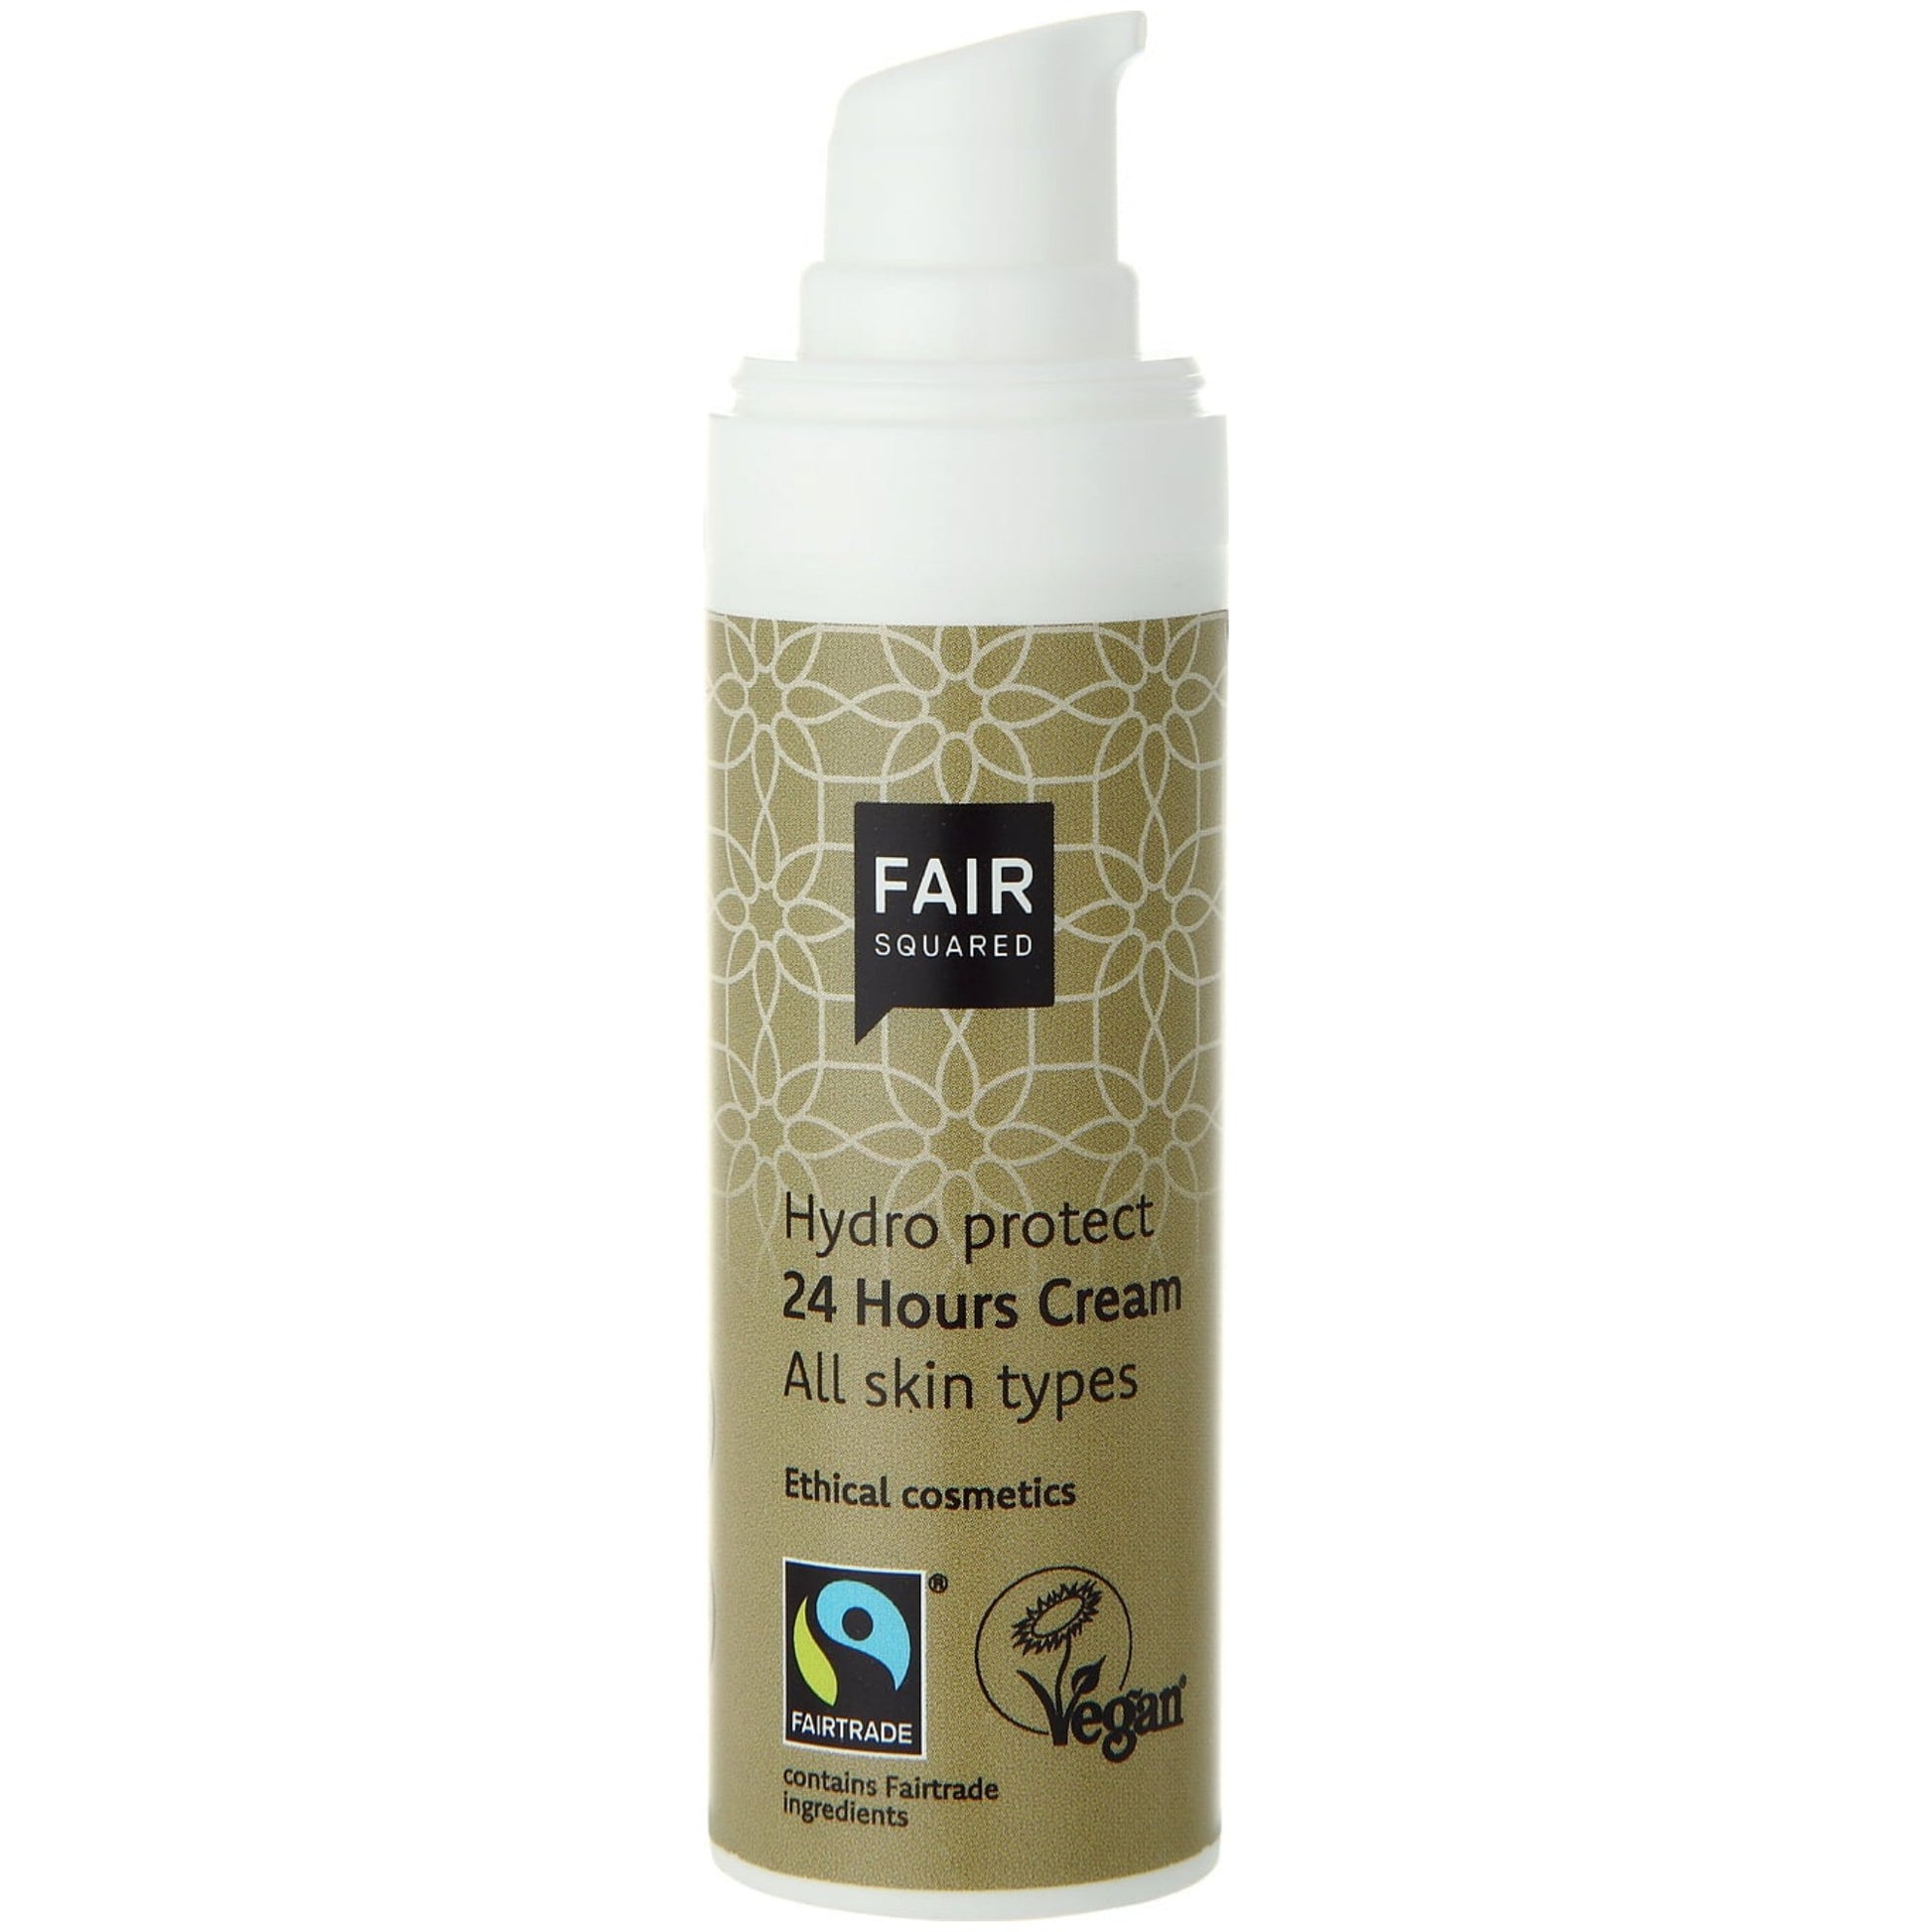 FAIR SQUARED Hydro Protect 24 Hours Cream | Fairtrade Vegan Natural Halal | Dispenser Open | BeoVERDE.ie